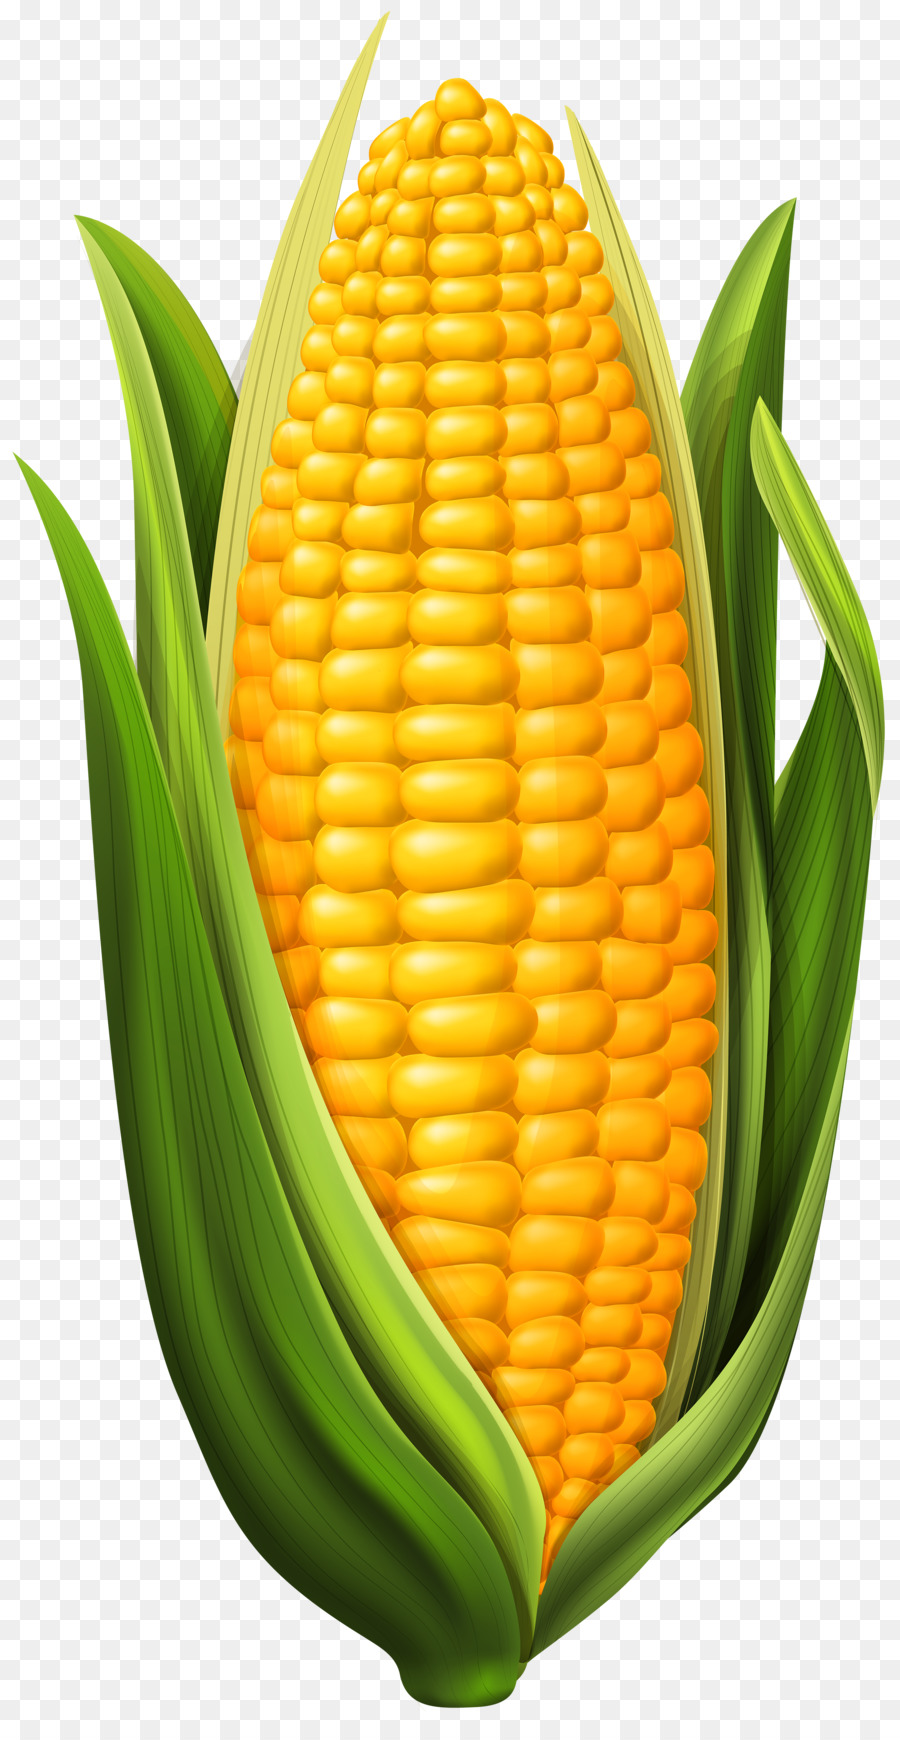 Image result for corn clipart